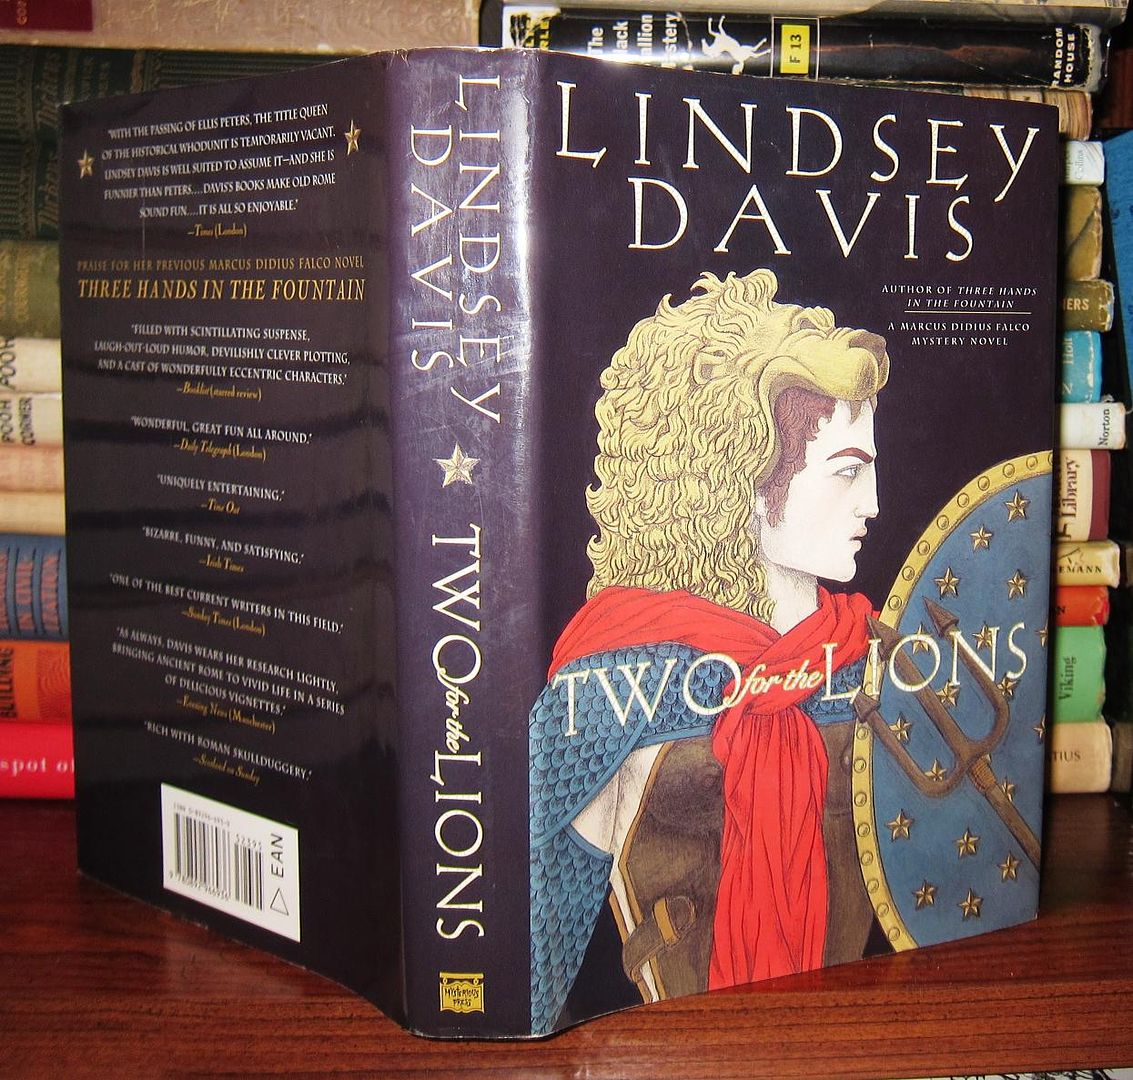 DAVIS, LINDSEY - Two for the Lions the Tenth Marcus Didius Falco Novel